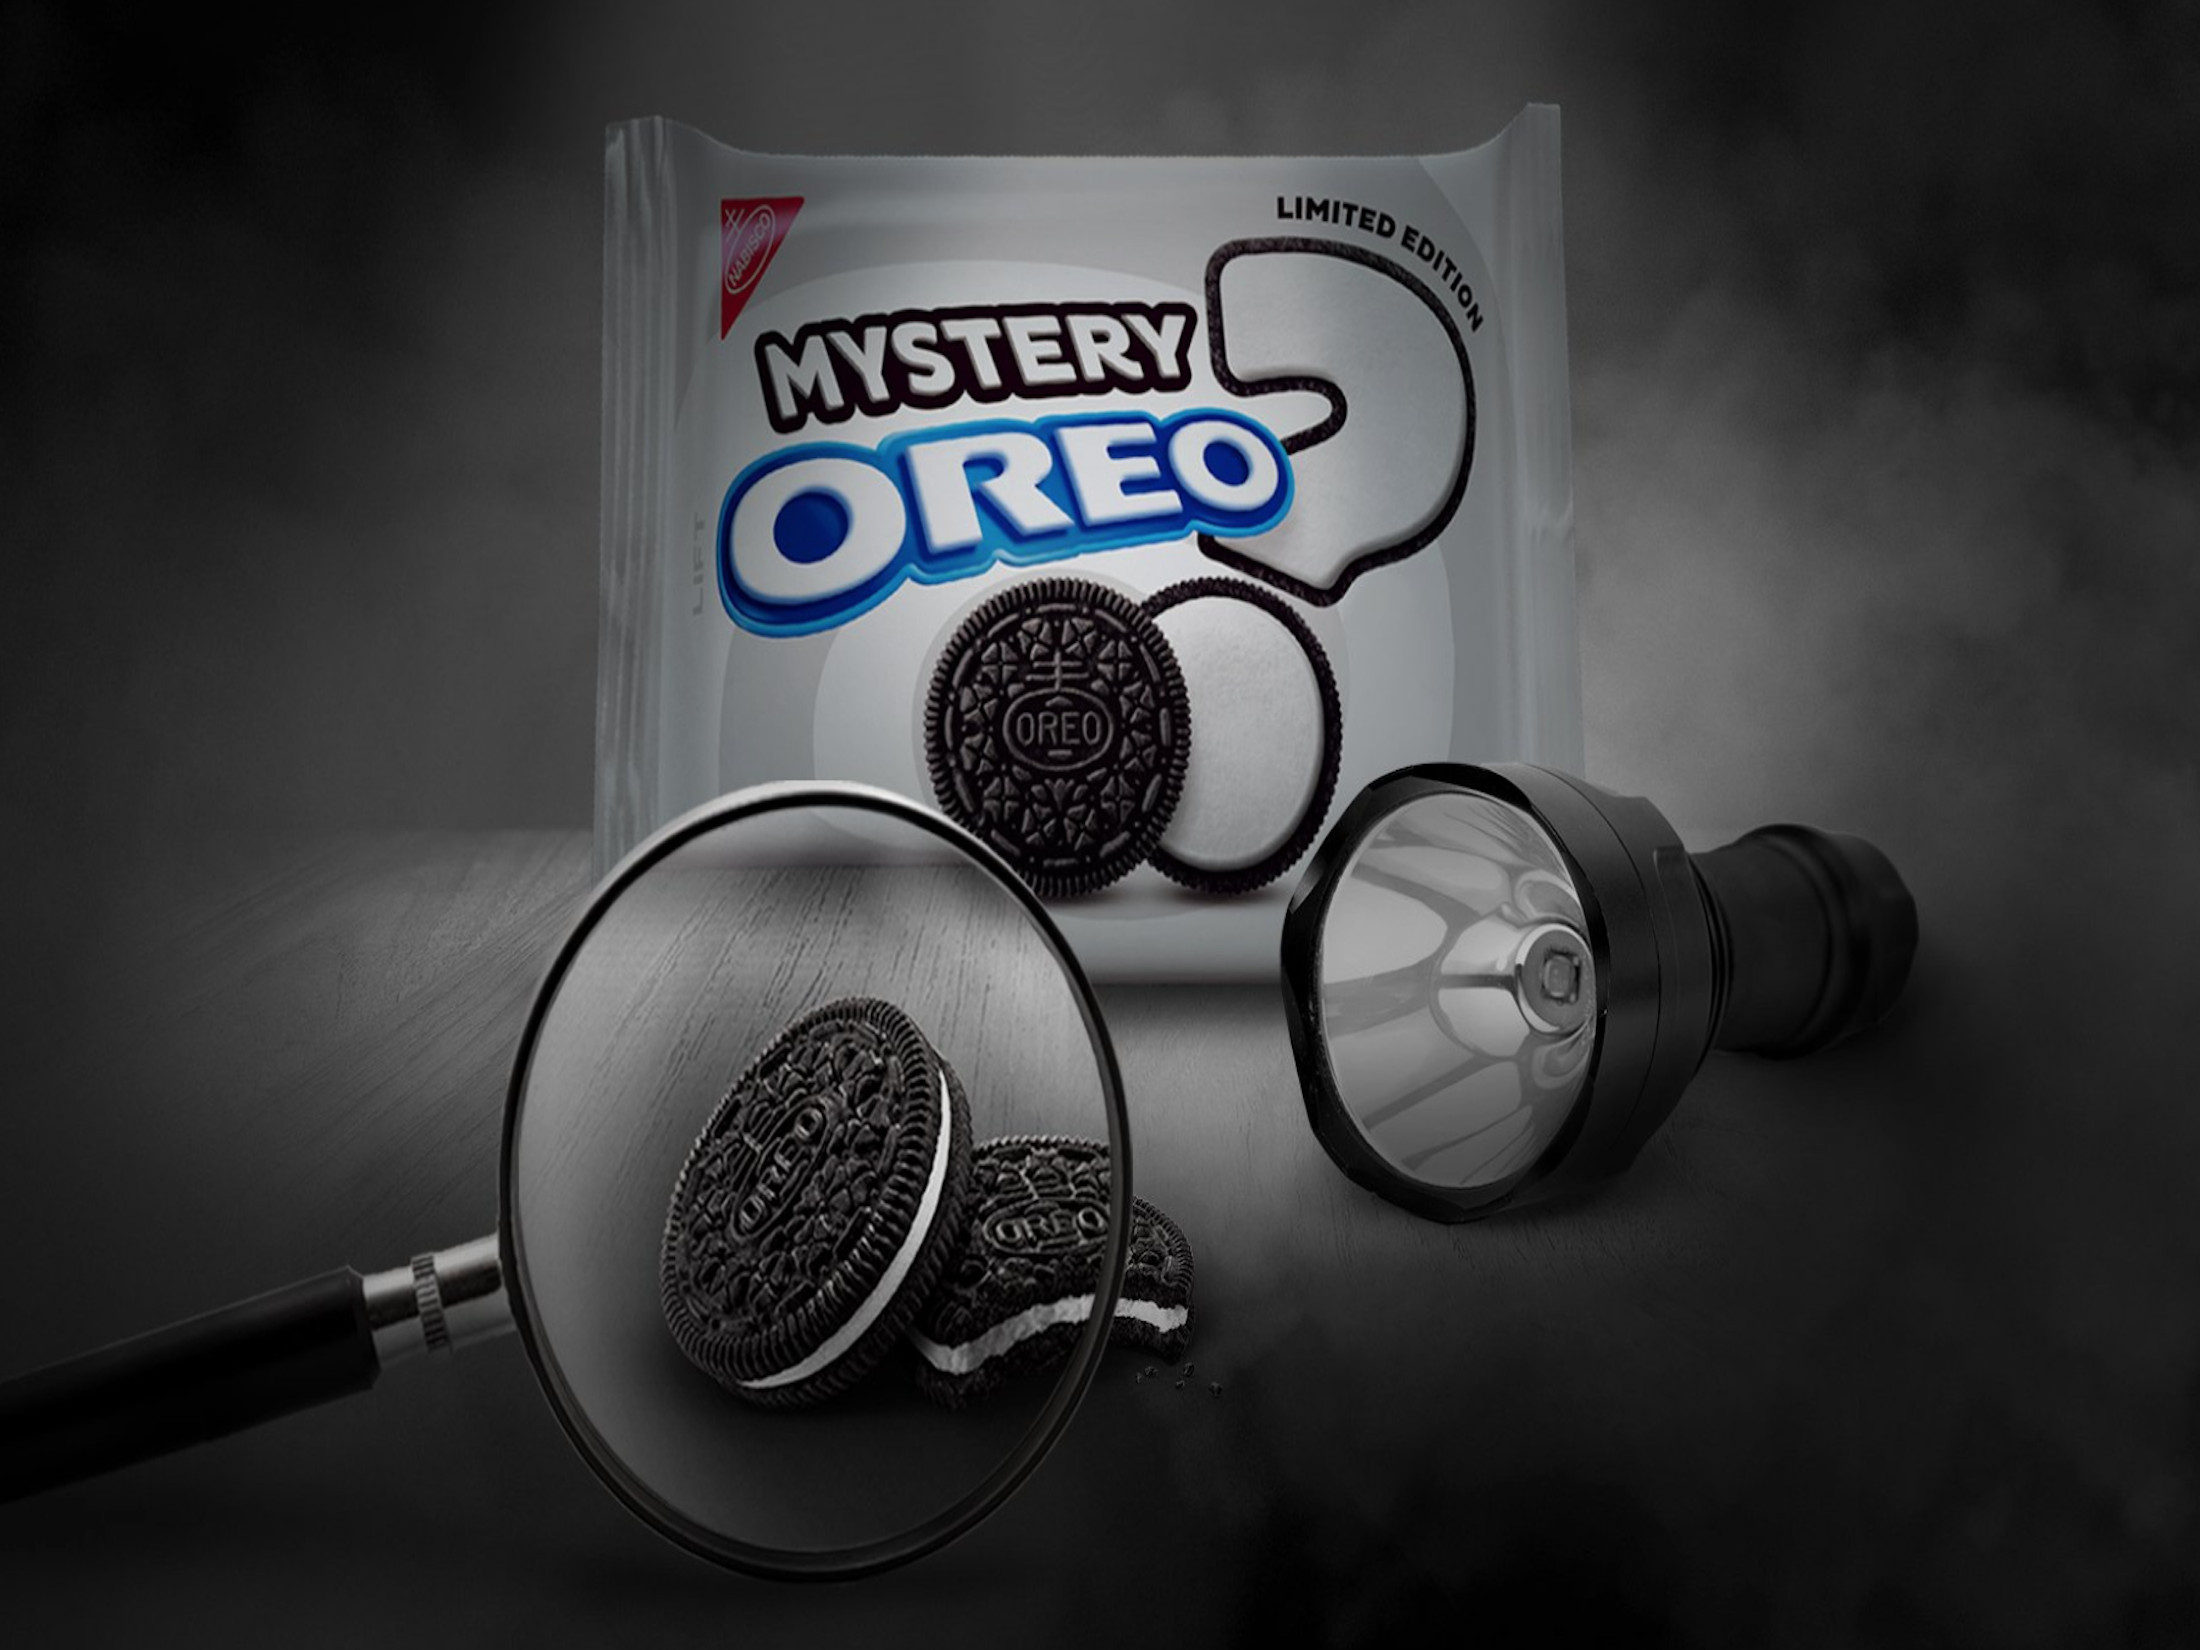 We Tried Oreo's Mystery Flavor, and We're Pretty Sure We Figured It Out